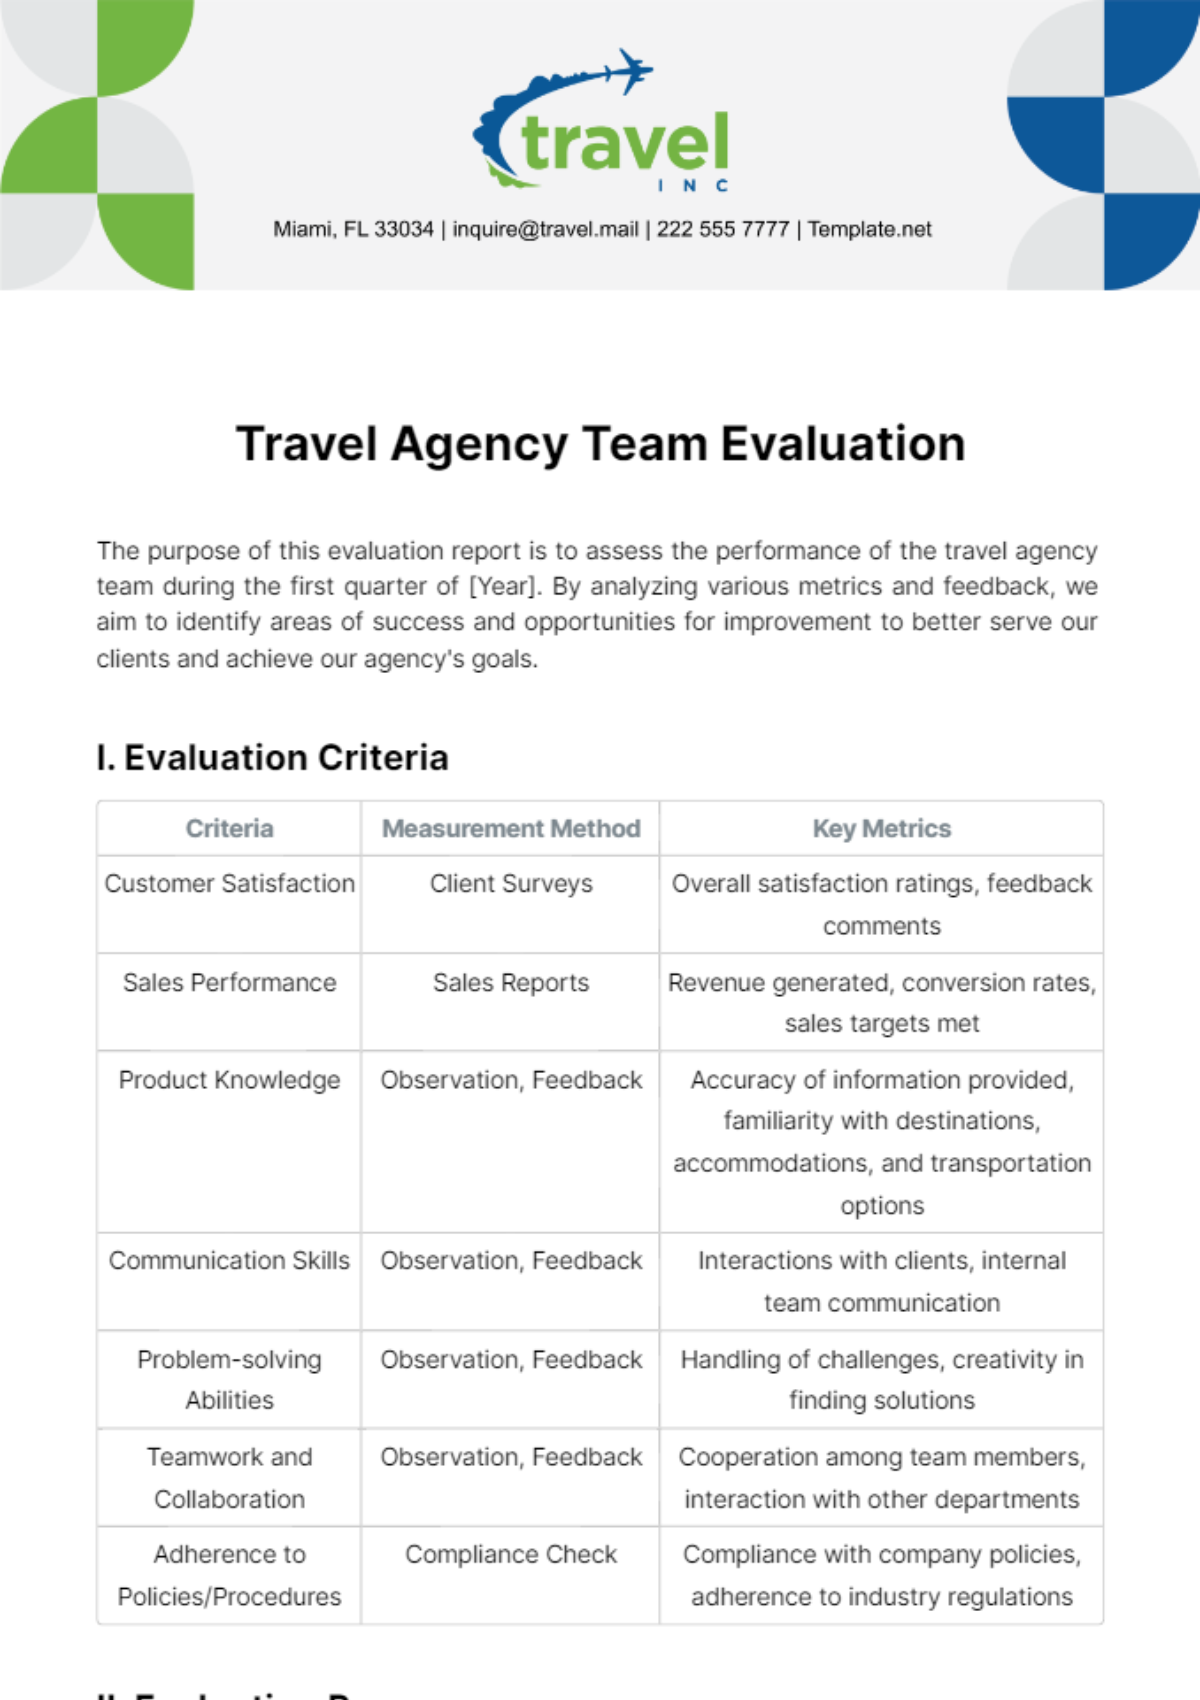 Free Travel Agency Team Evaluation Template